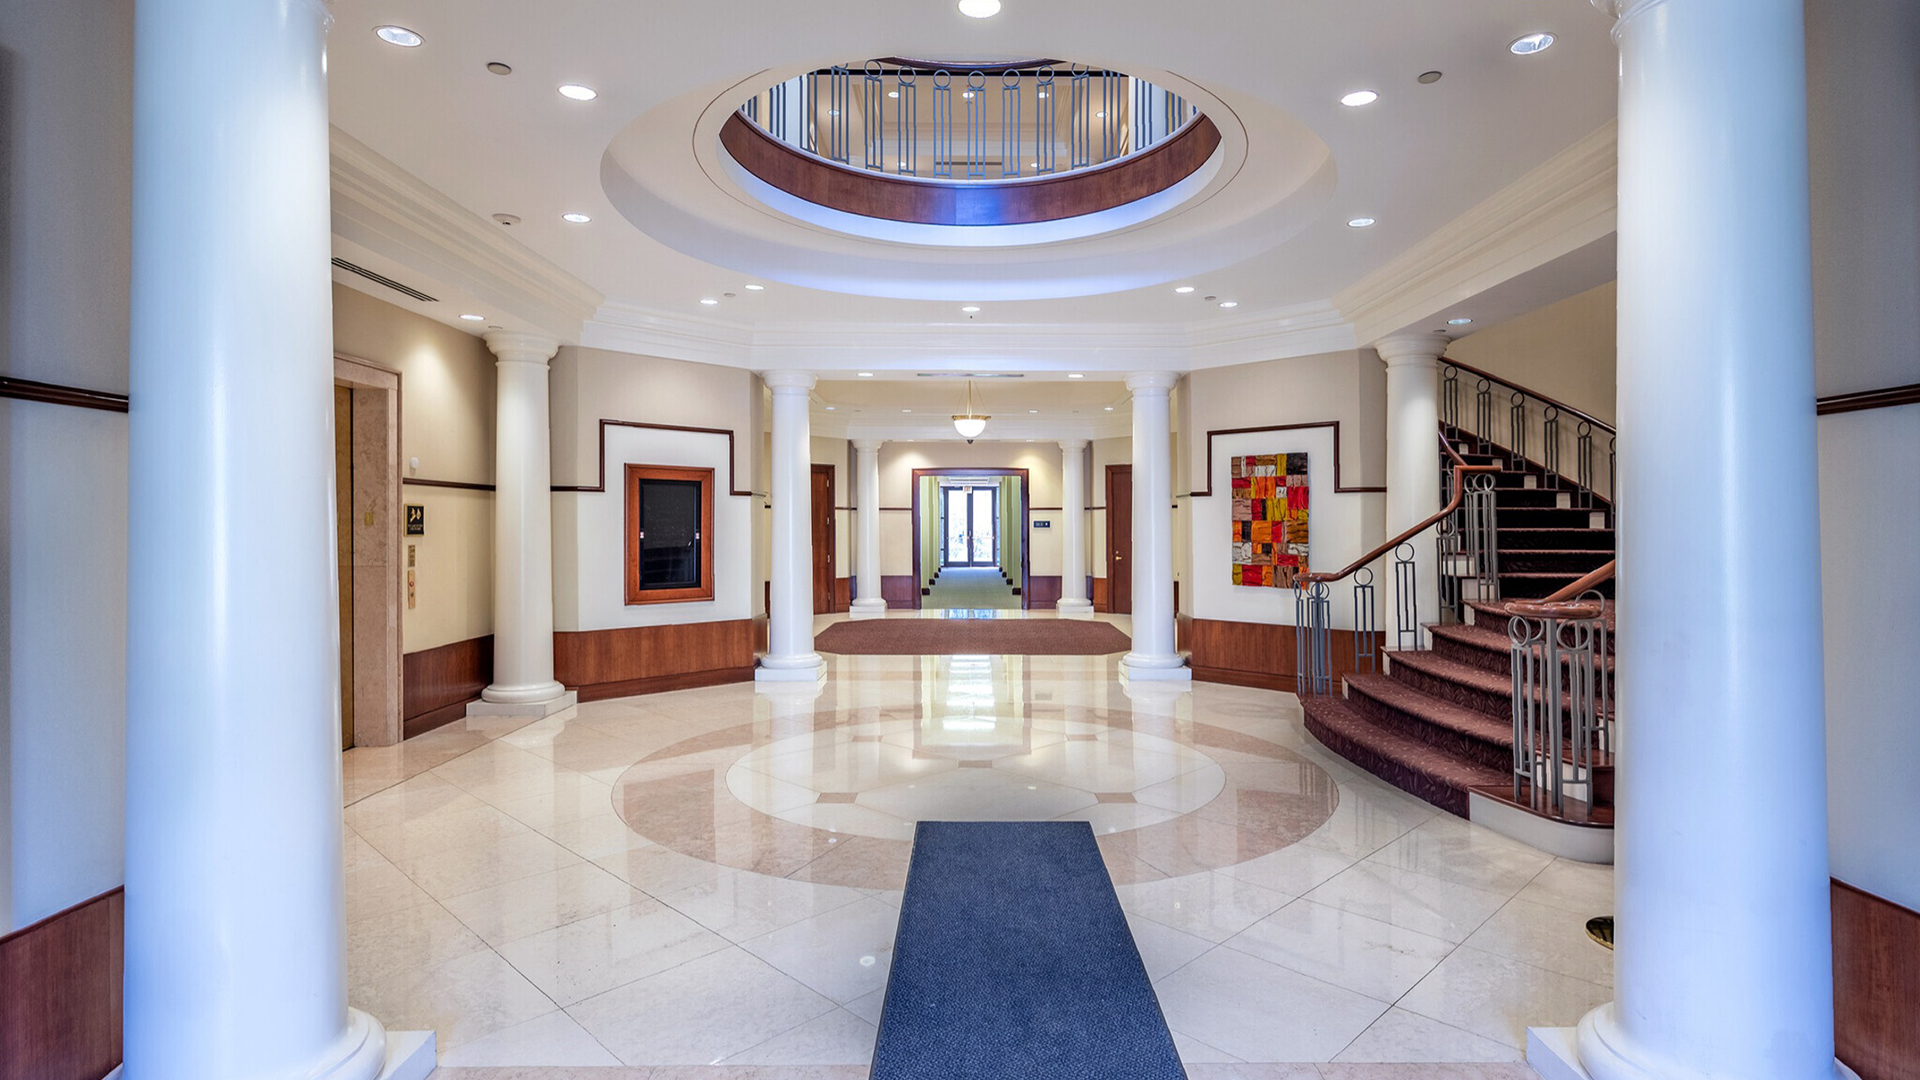 Image of Building Lobby on 1st Floor